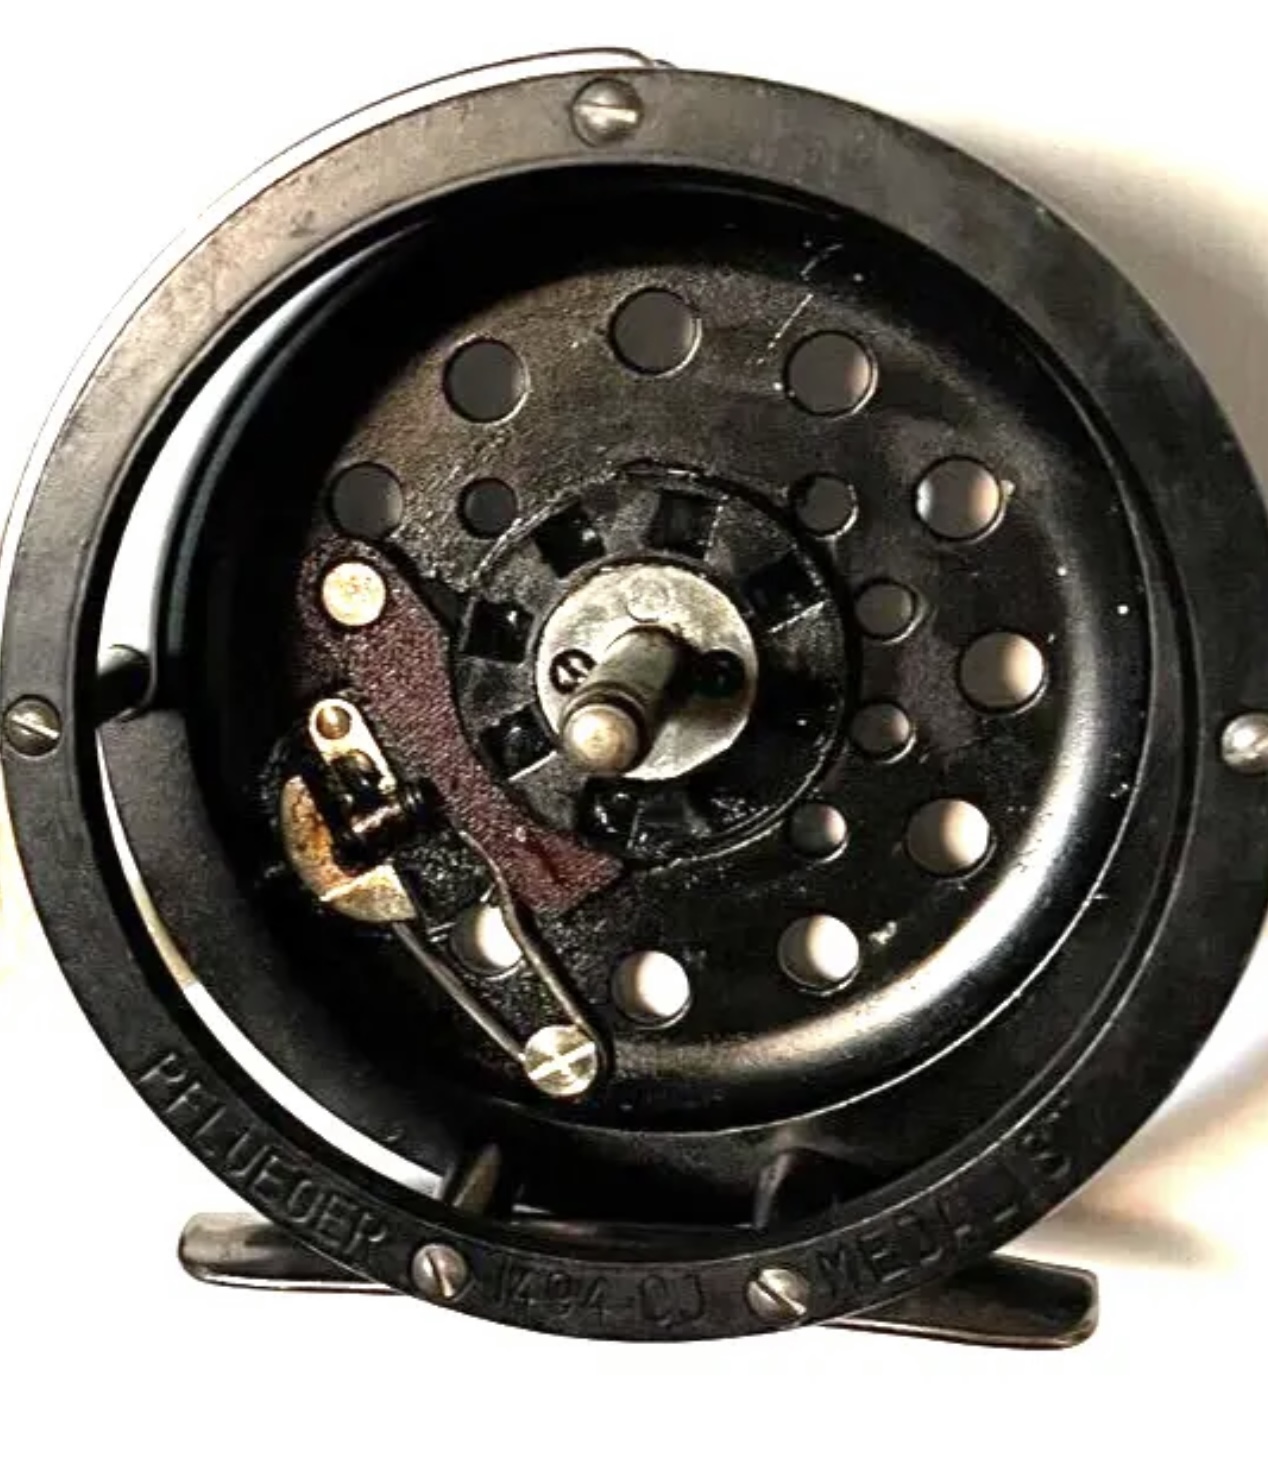 Pflueger Medalist 1498 Fly Fishing Reel. W/ One-Pfoot Ugrades. Made in USA.